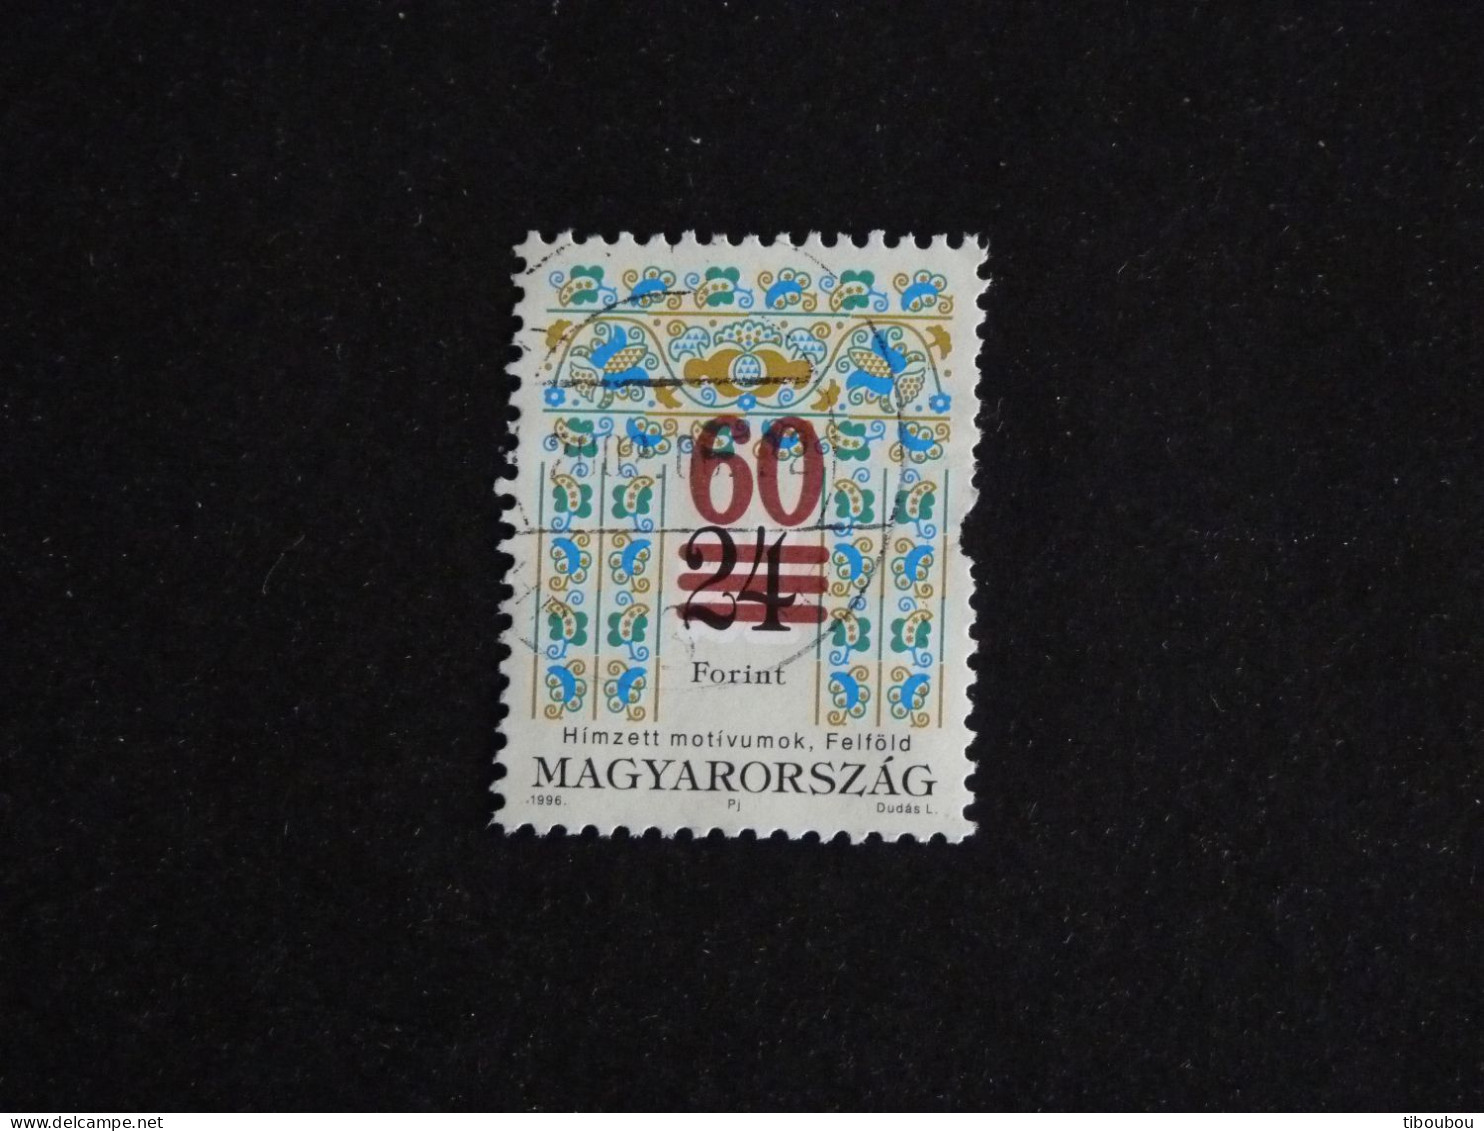 HONGRIE HUNGARY MAGYAR YT 3602 OBLITERE - MOTIFS DECORATIFS FOLKLORIQUES SURCHARGE - Used Stamps